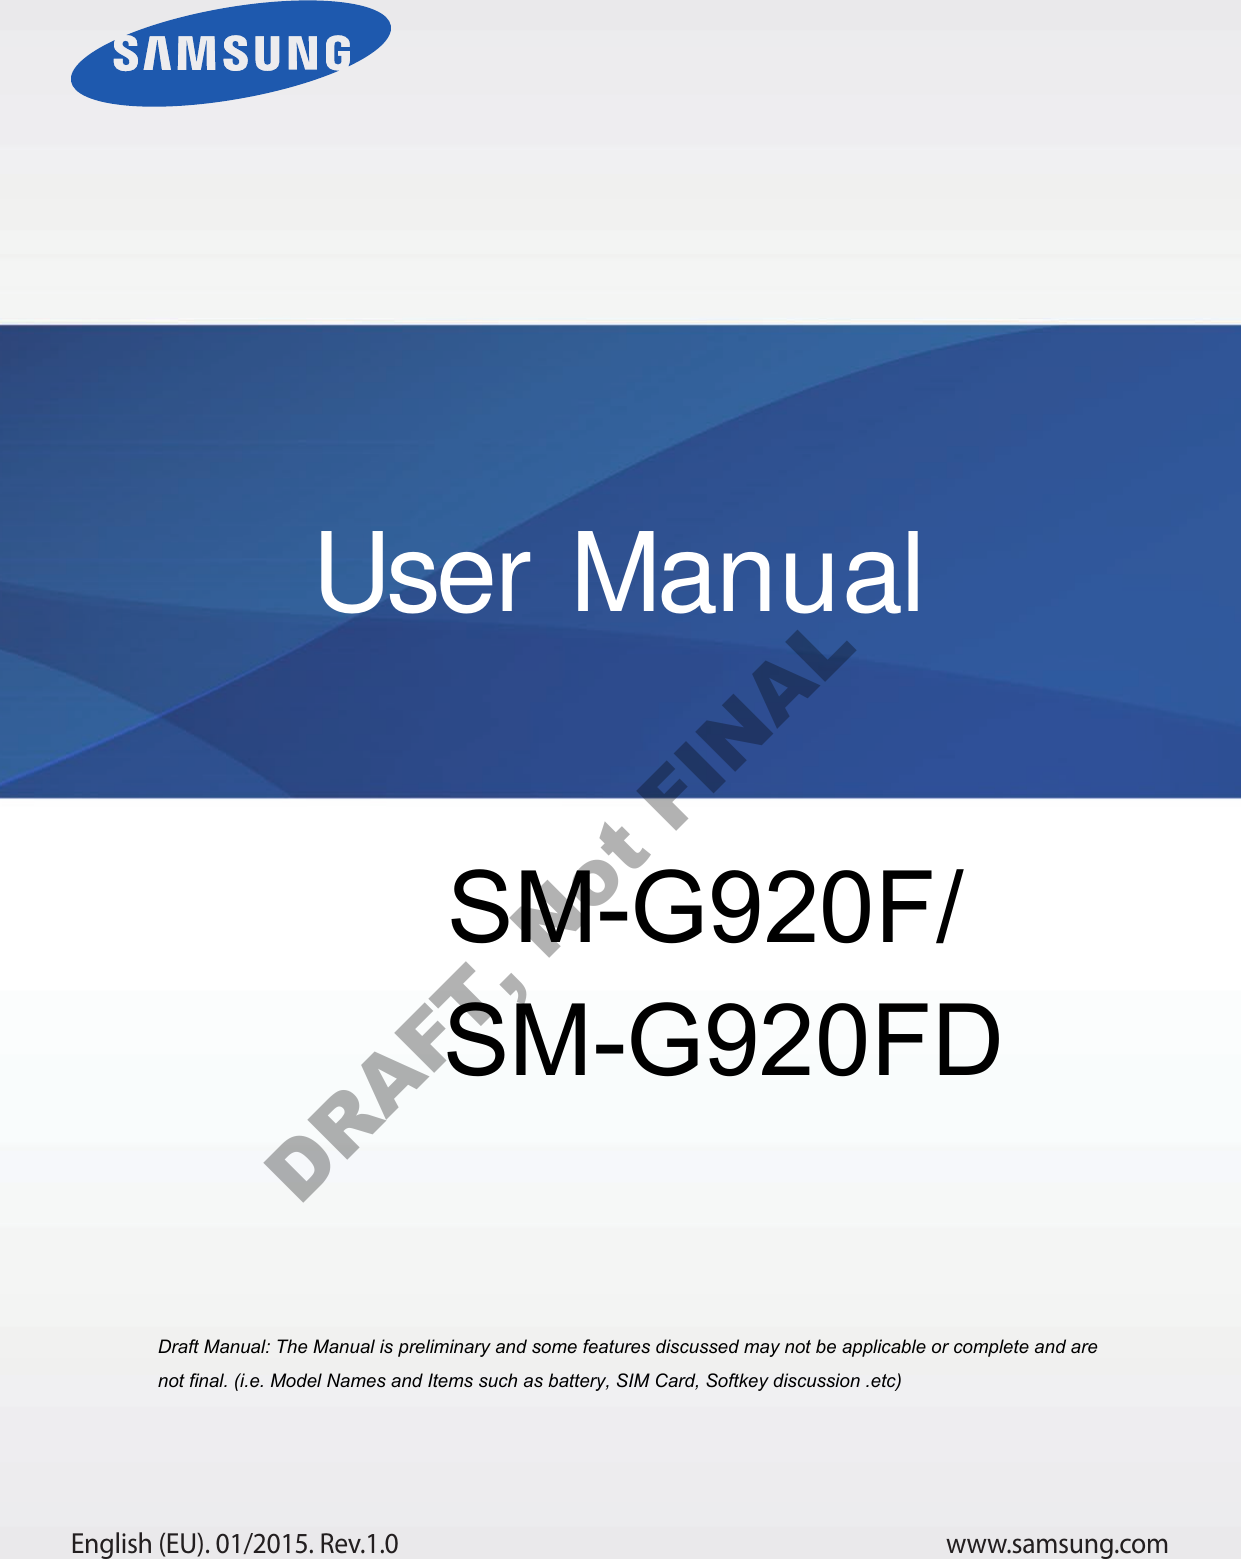 www.samsung.comUser ManualEnglish (EU). 01/2015. Rev.1.0Draft Manual: The Manual is preliminary and some features discussed may not be applicable or complete and are not final. (i.e. Model Names and Items such as battery, SIM Card, Softkey discussion .etc) SM-G920F/    SM-G920FDDRAFT, Not FINAL